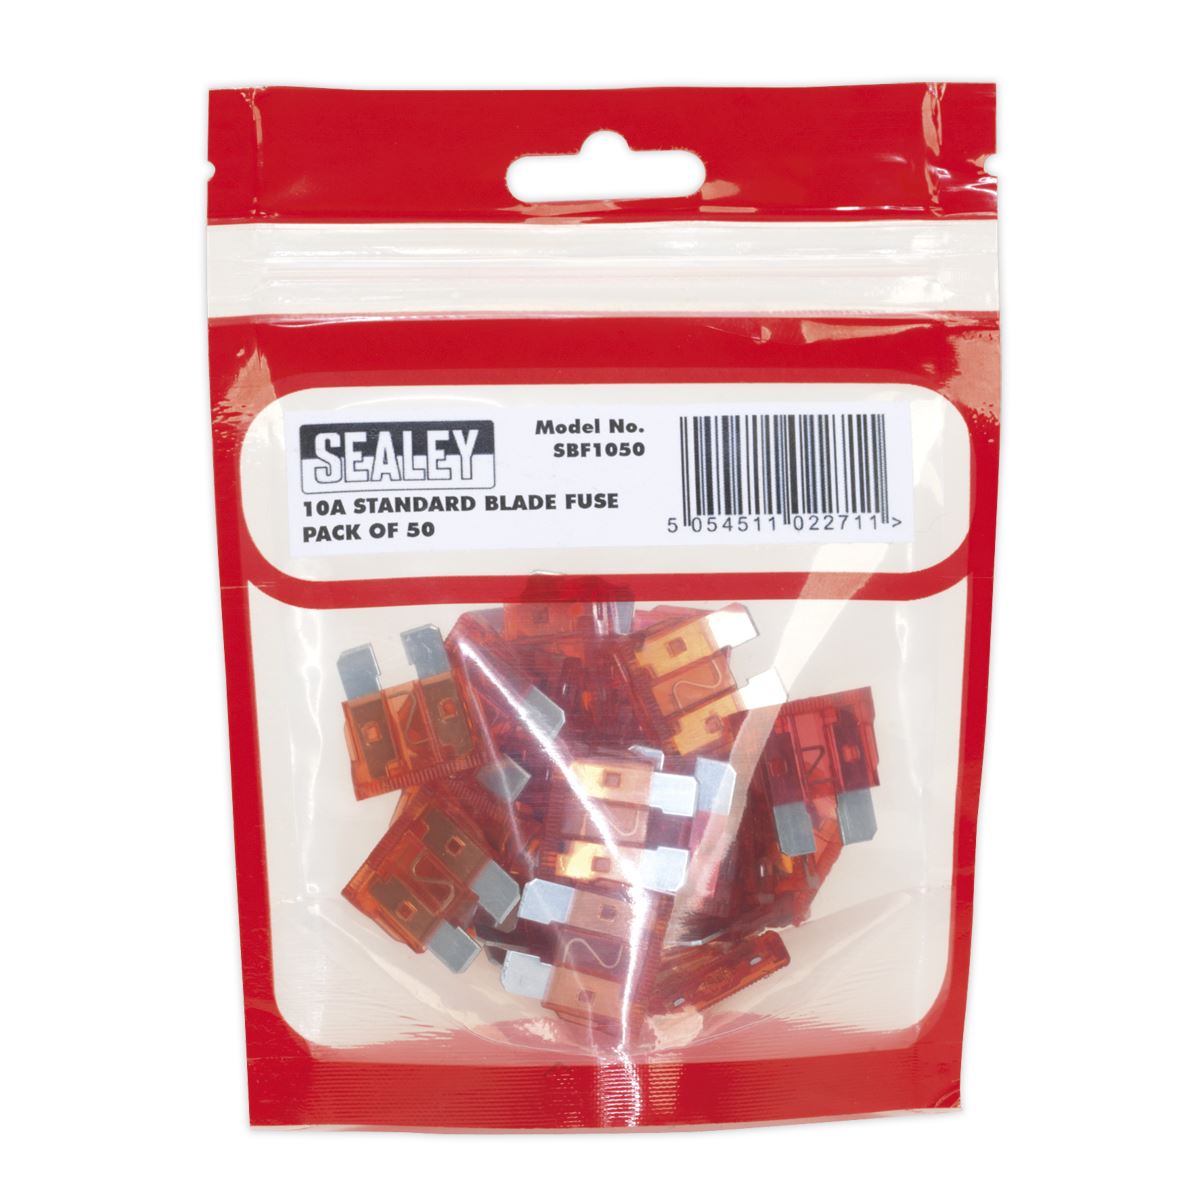 Sealey Automotive Standard Blade Fuse 10A Pack of 50